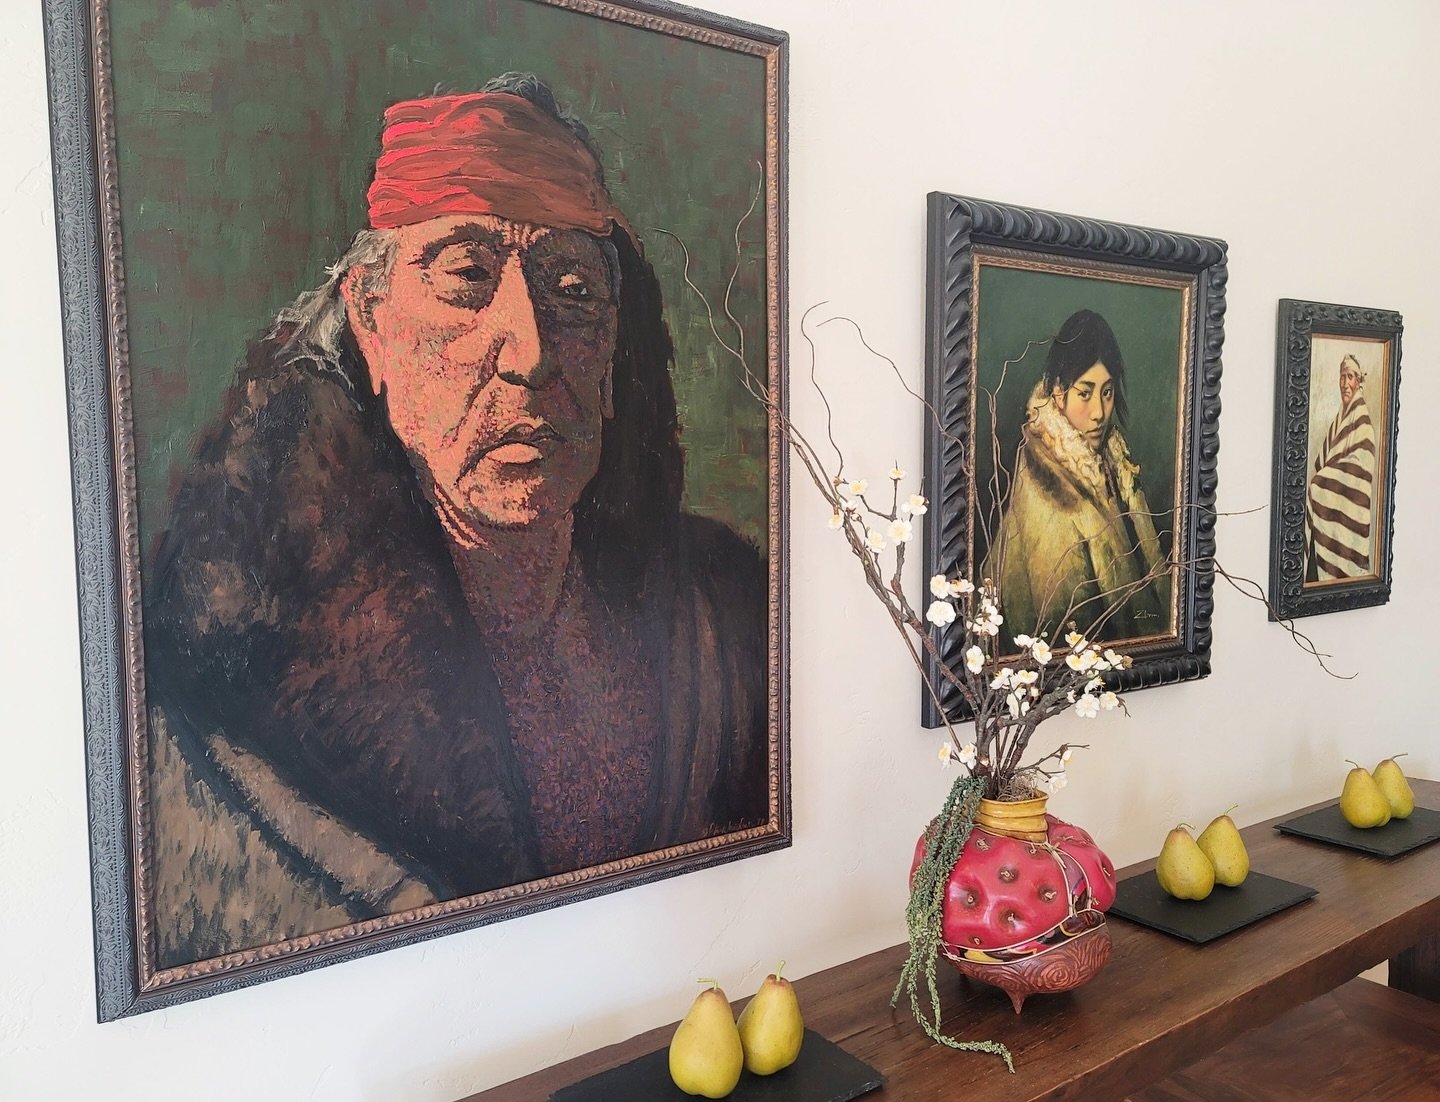 We had a wonderful customer send us photos of their new Steve Schrepferman &ldquo;Knot Urn&rdquo;in their home. We think it looks perfect with their beautiful art collection 🙌🏻. Thank you for sharing!!⁠
⁠
#artcollection #santafeartgallery #santafea